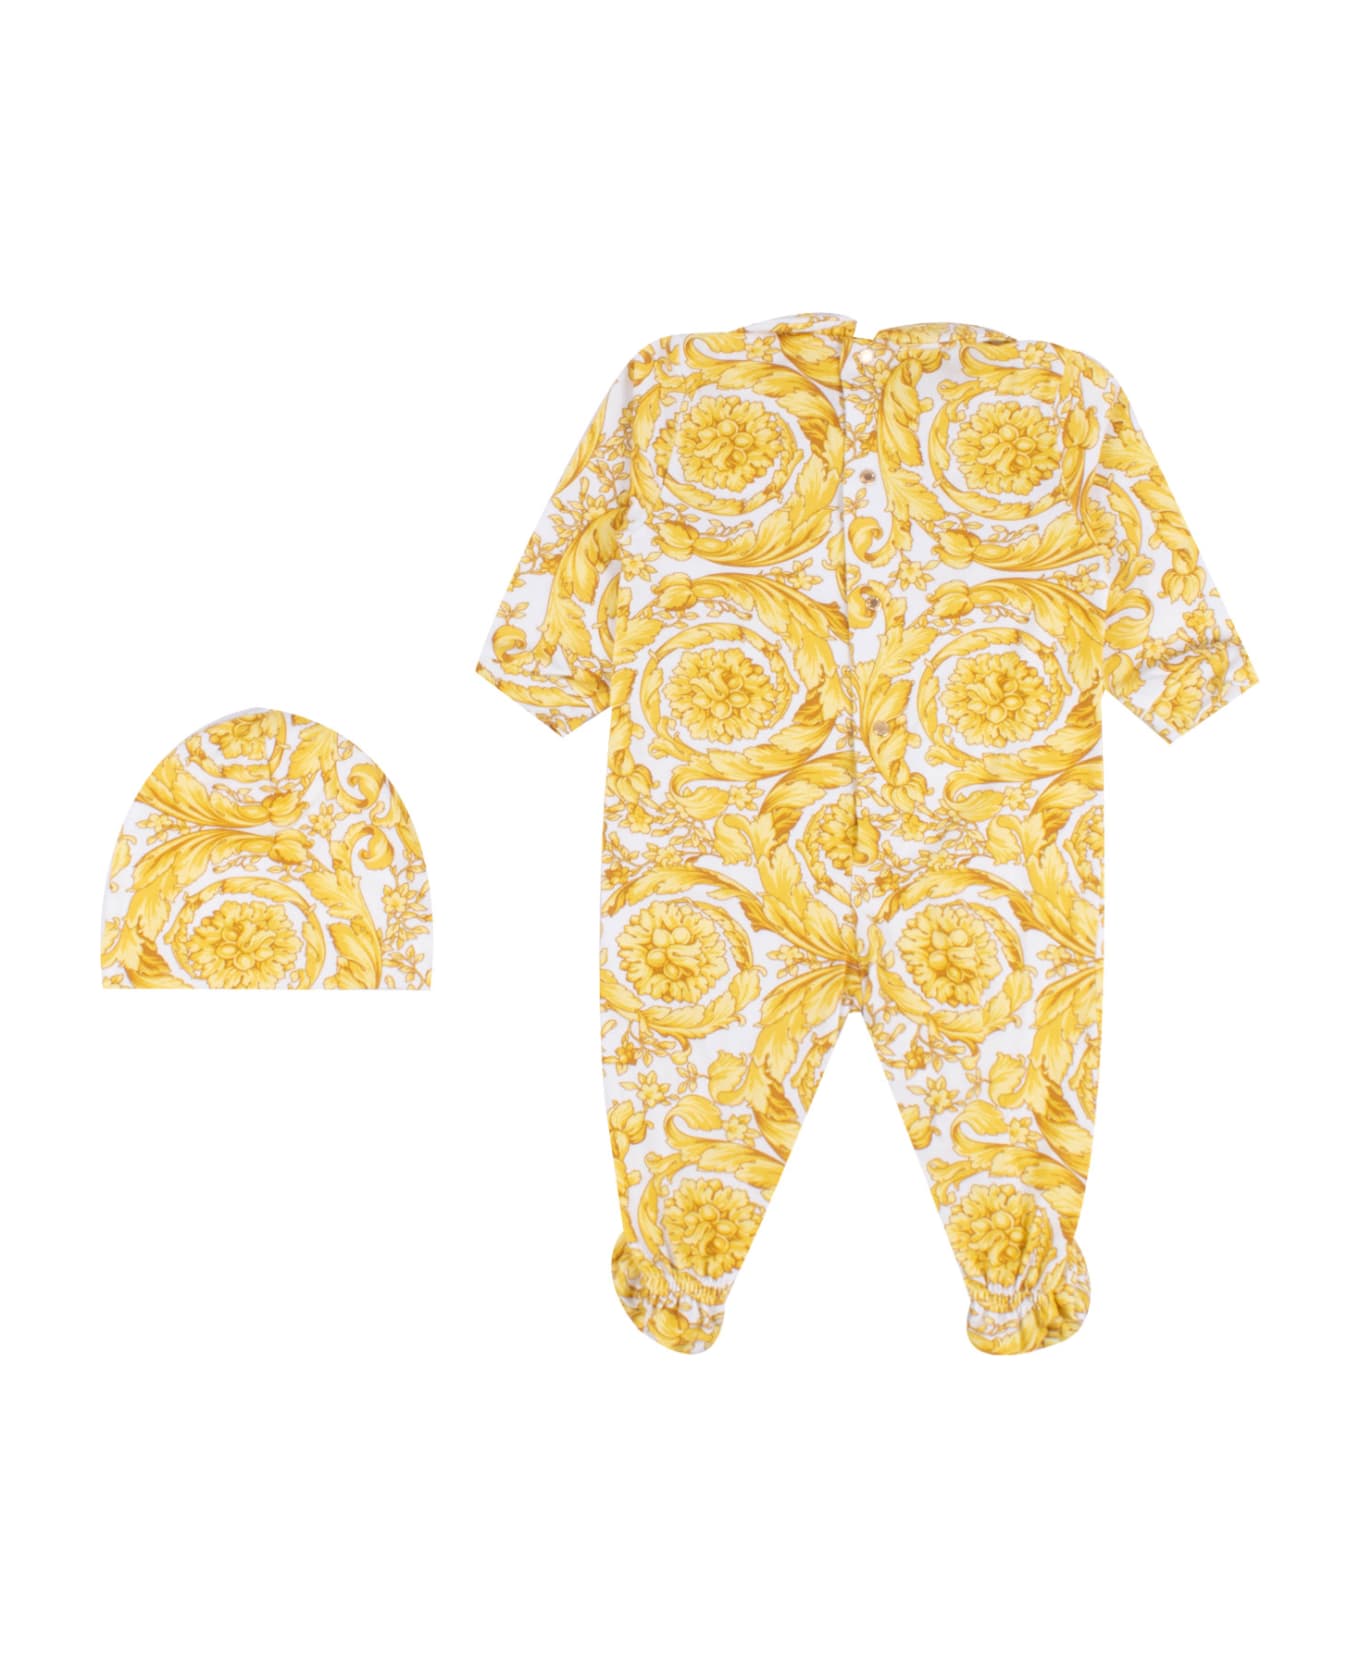 Versace Baroque Romper And Hat Set - Gold